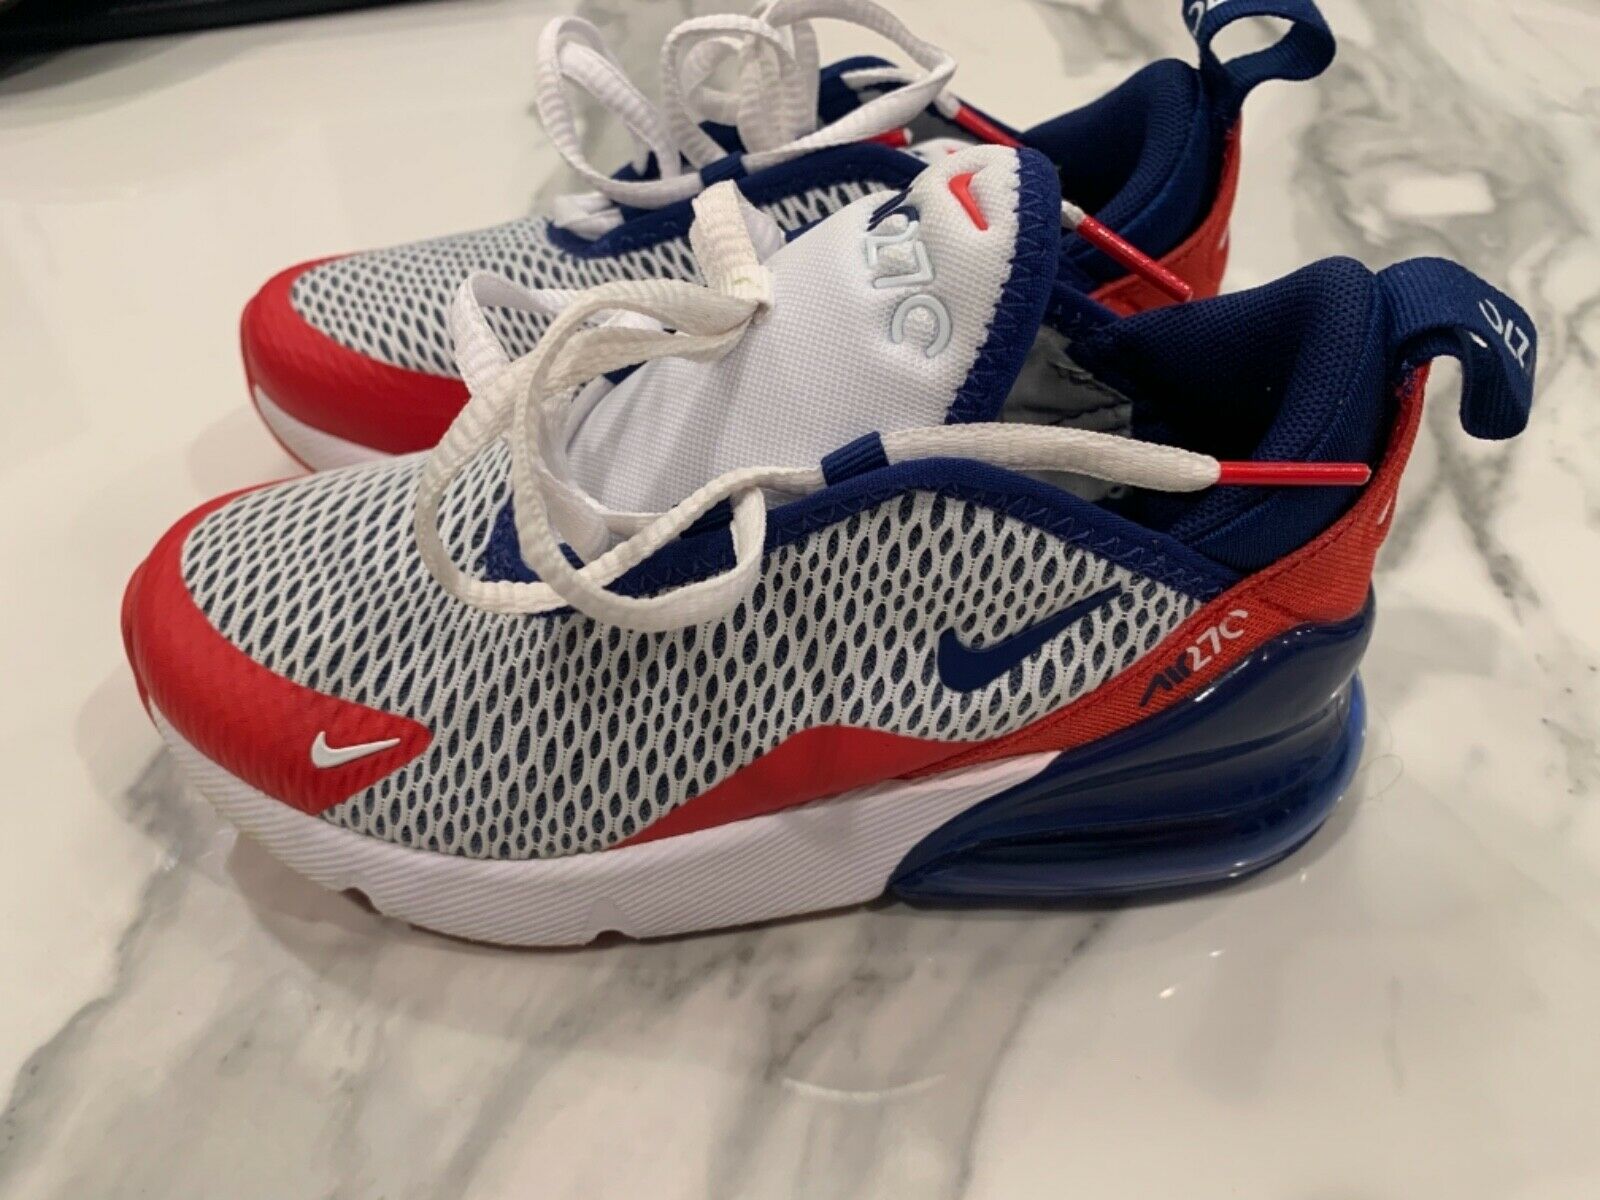 Nike AirMax 270 Extreme Little Kids White Royal Red Shoes Youth Size 12.5